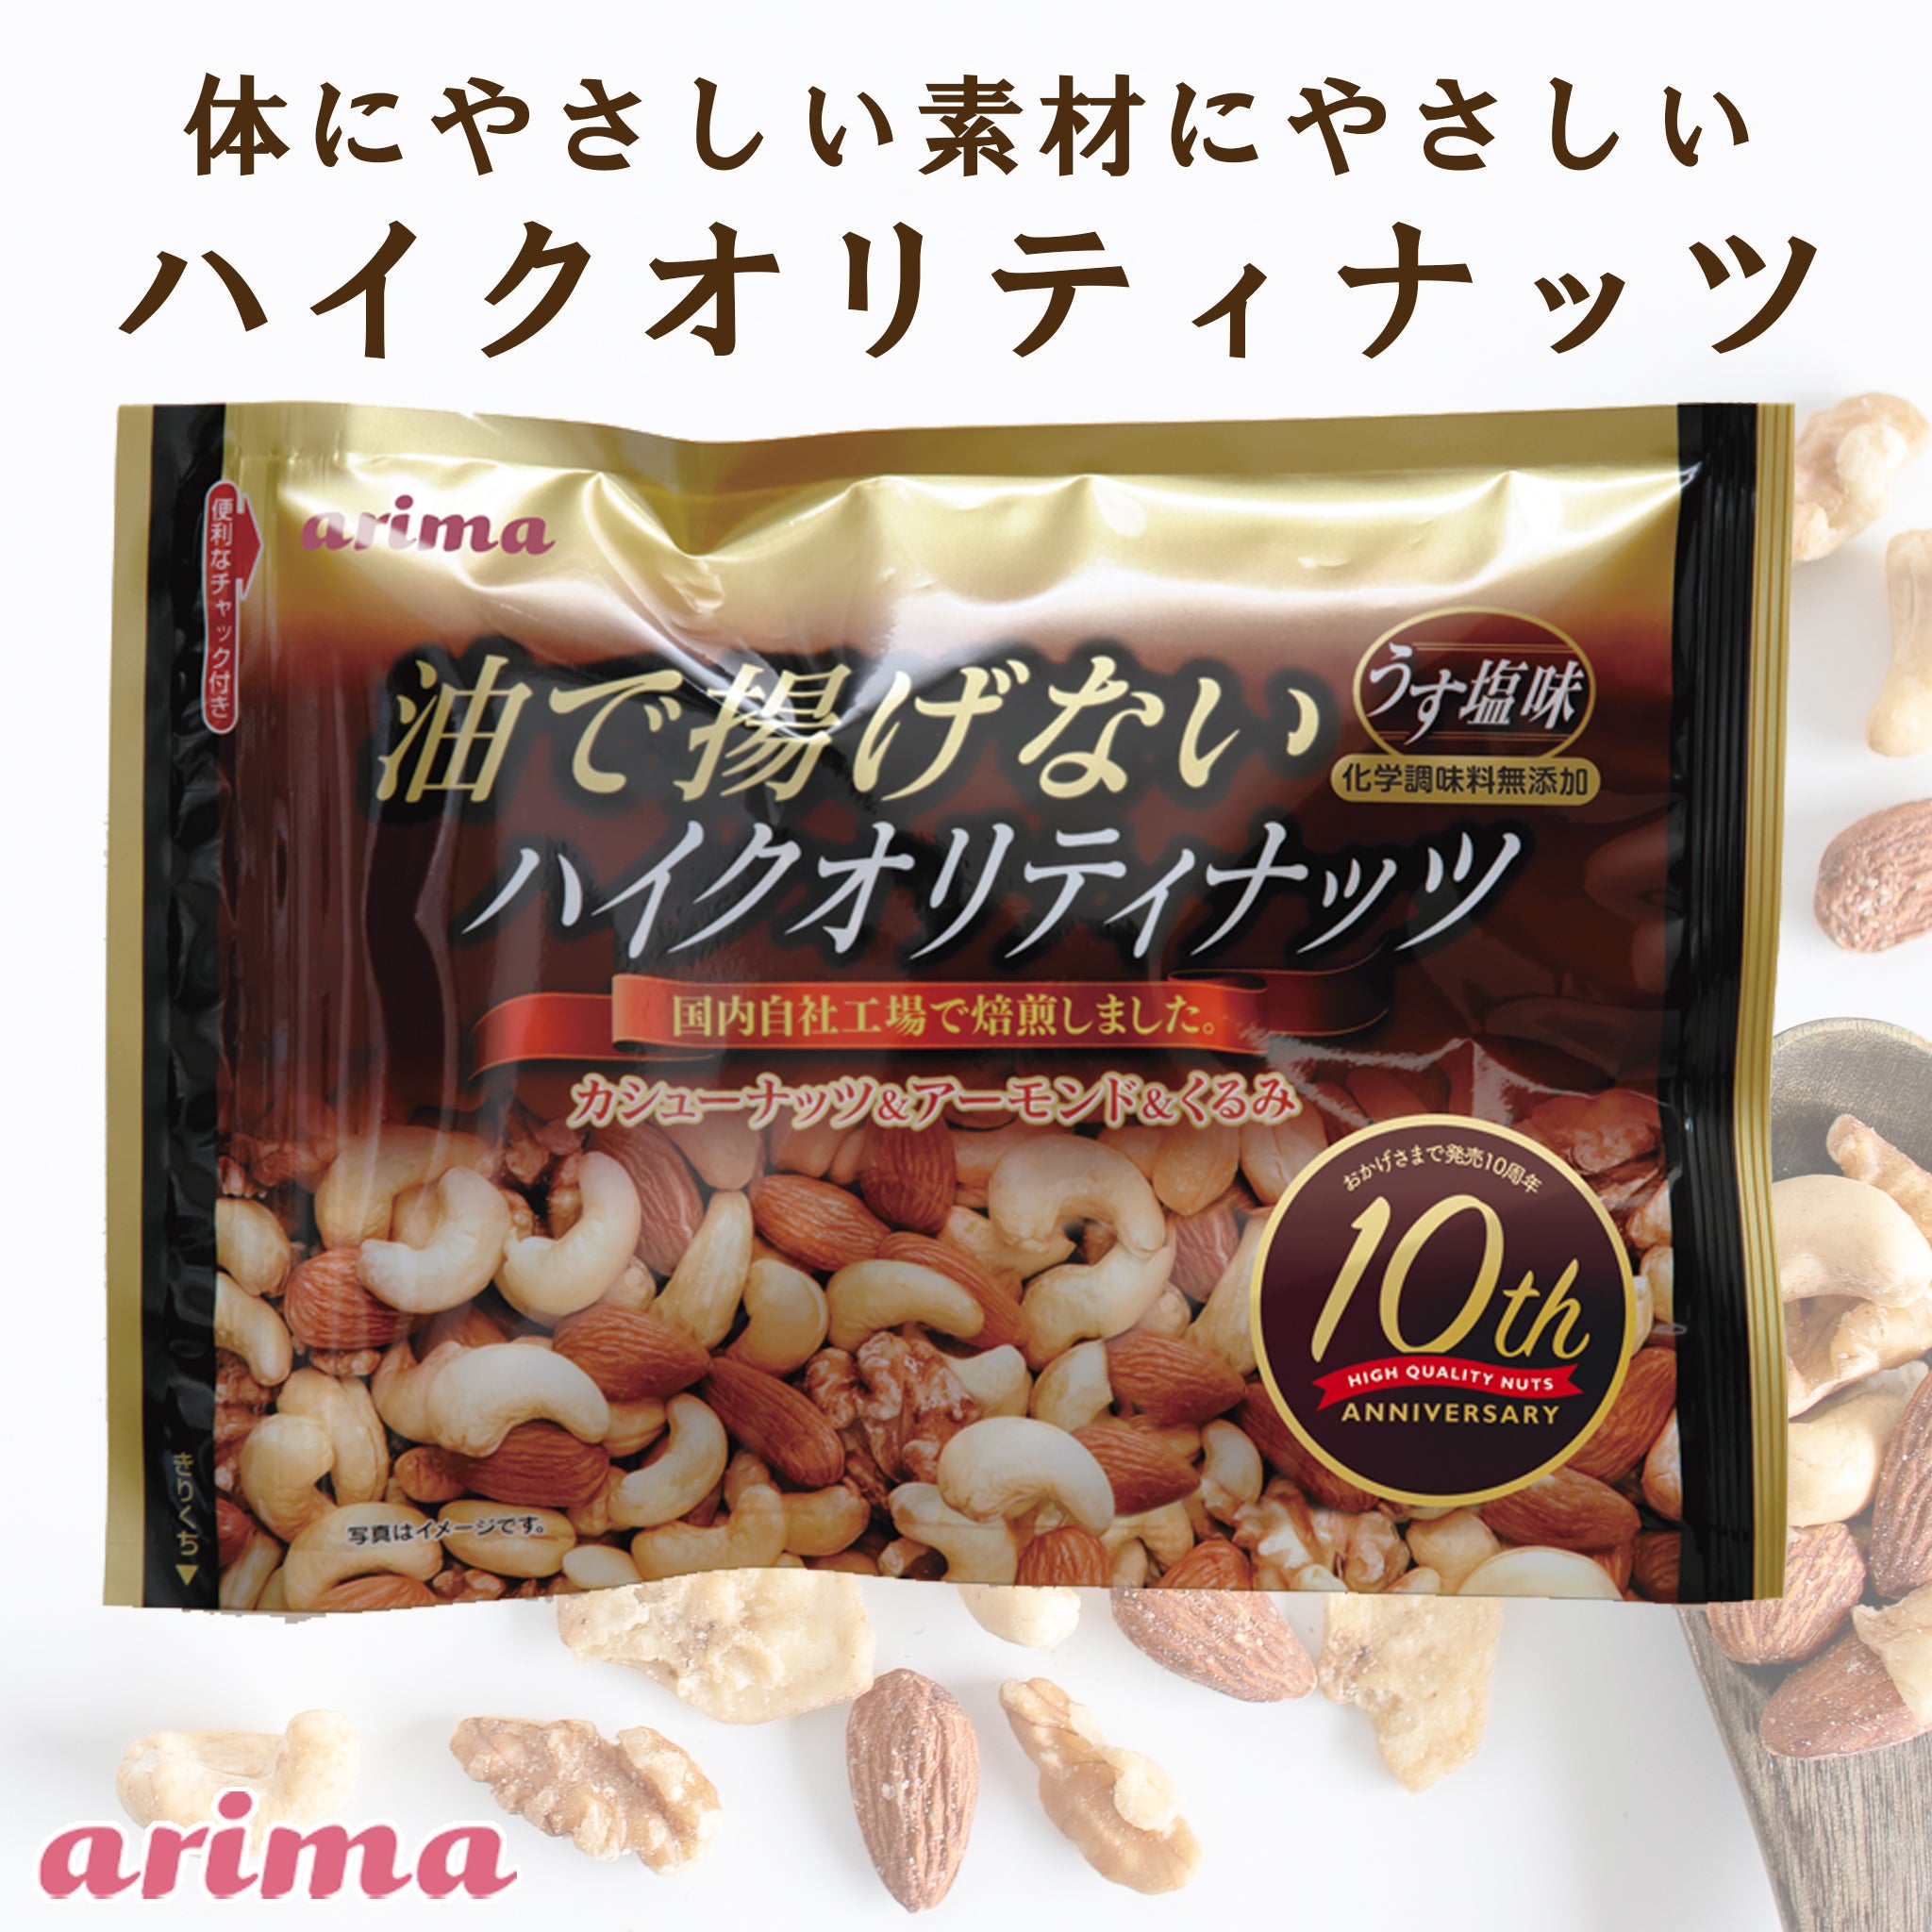 High quality nuts that are not fried in oil 160g Arima Hokodo